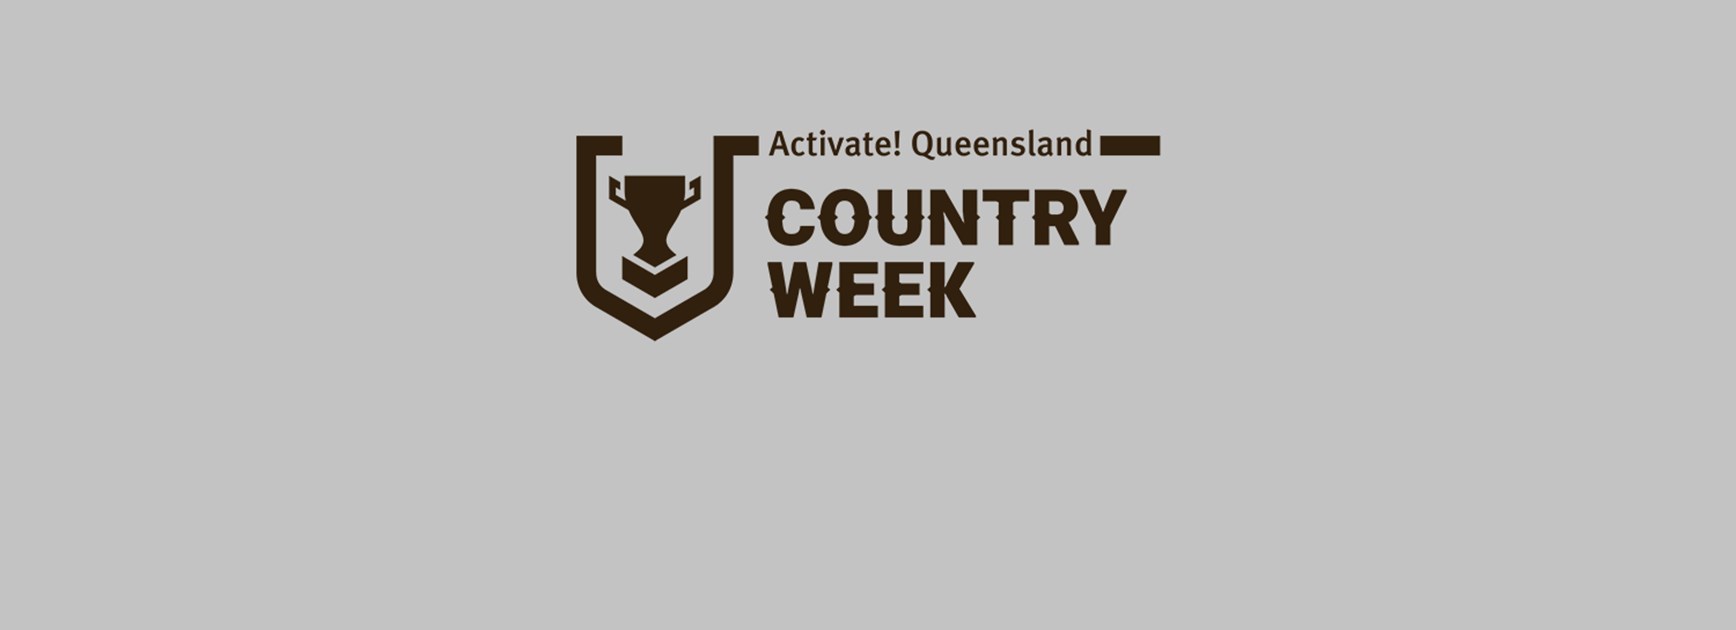 'Activate! Queensland' Country Week Round 16 team lists